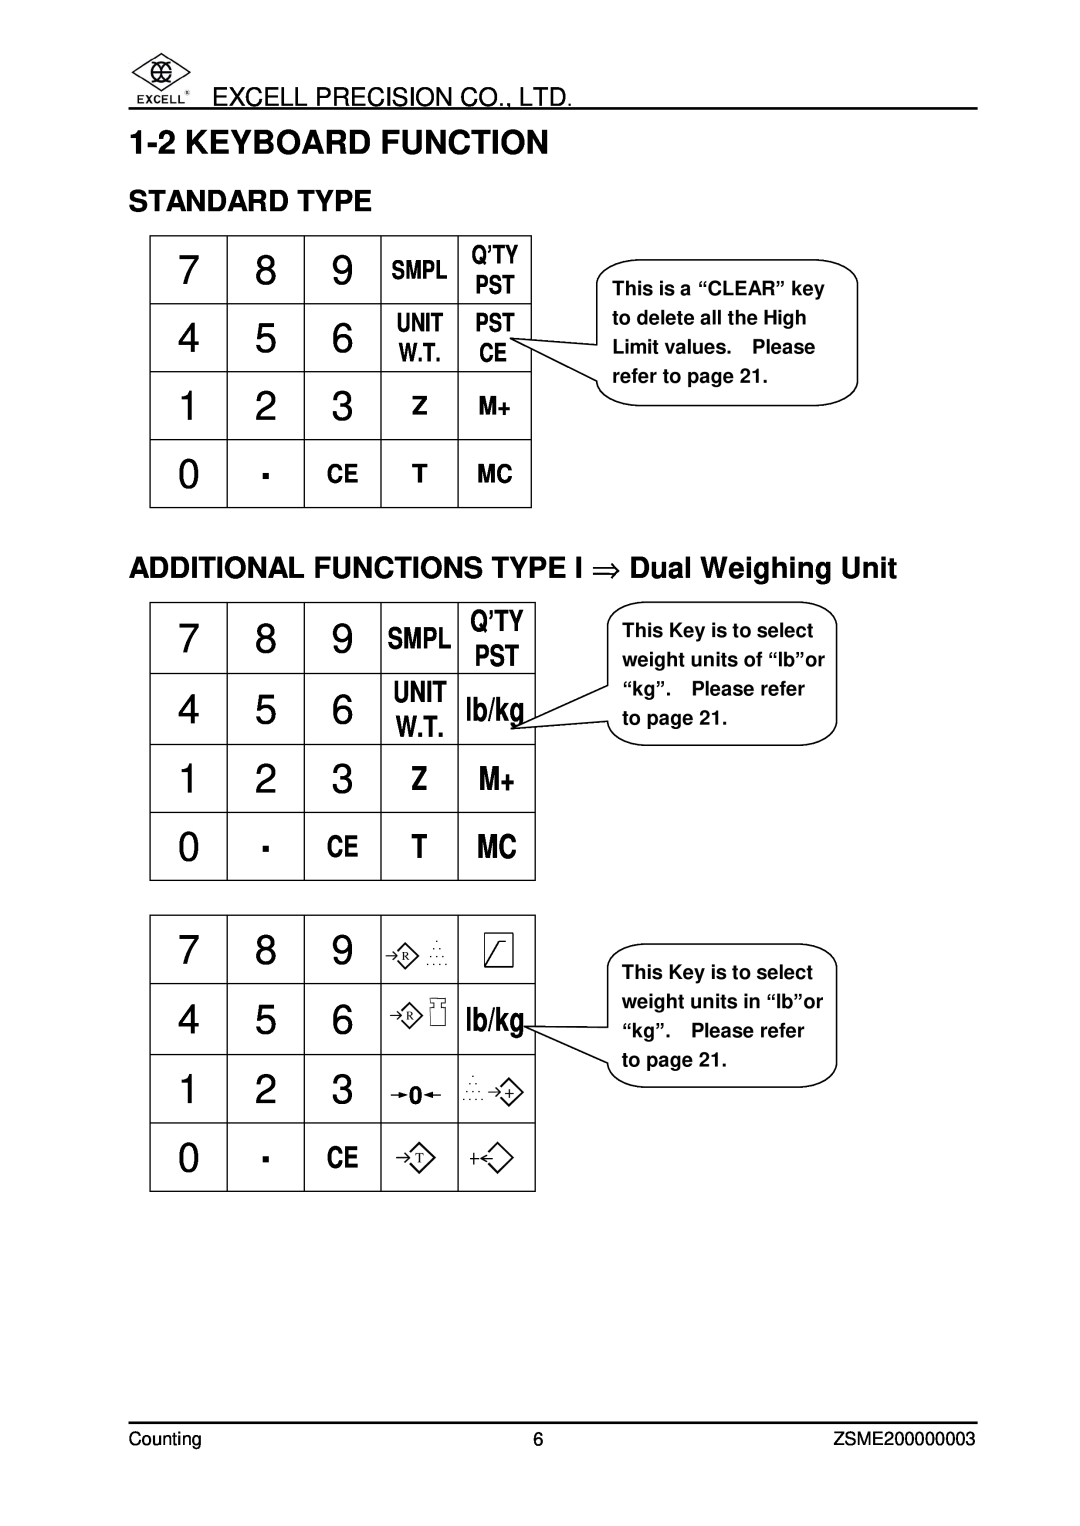 Excell Precision Counting Scale Keyboard Function, Standard Type, ADDITIONAL FUNCTIONS TYPE I ⇒ Dual Weighing Unit, Smpl 